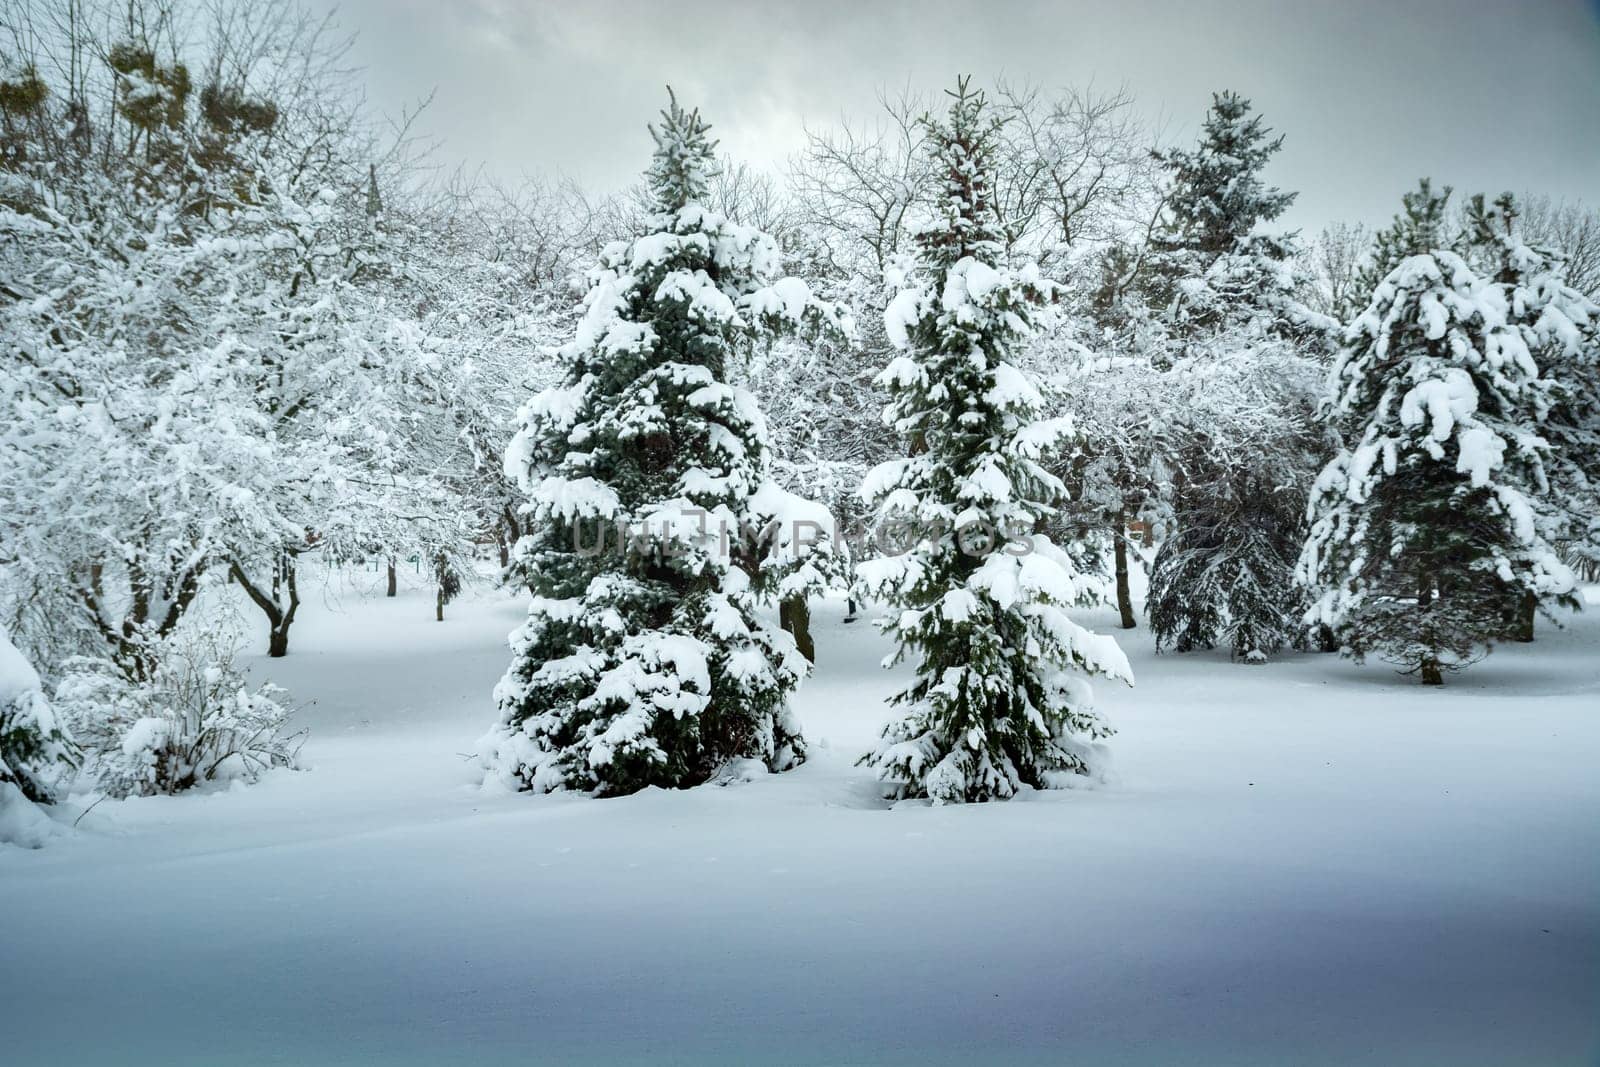 Heavily snow-covered trees in the park, Chelm, Lubelskie, Poland